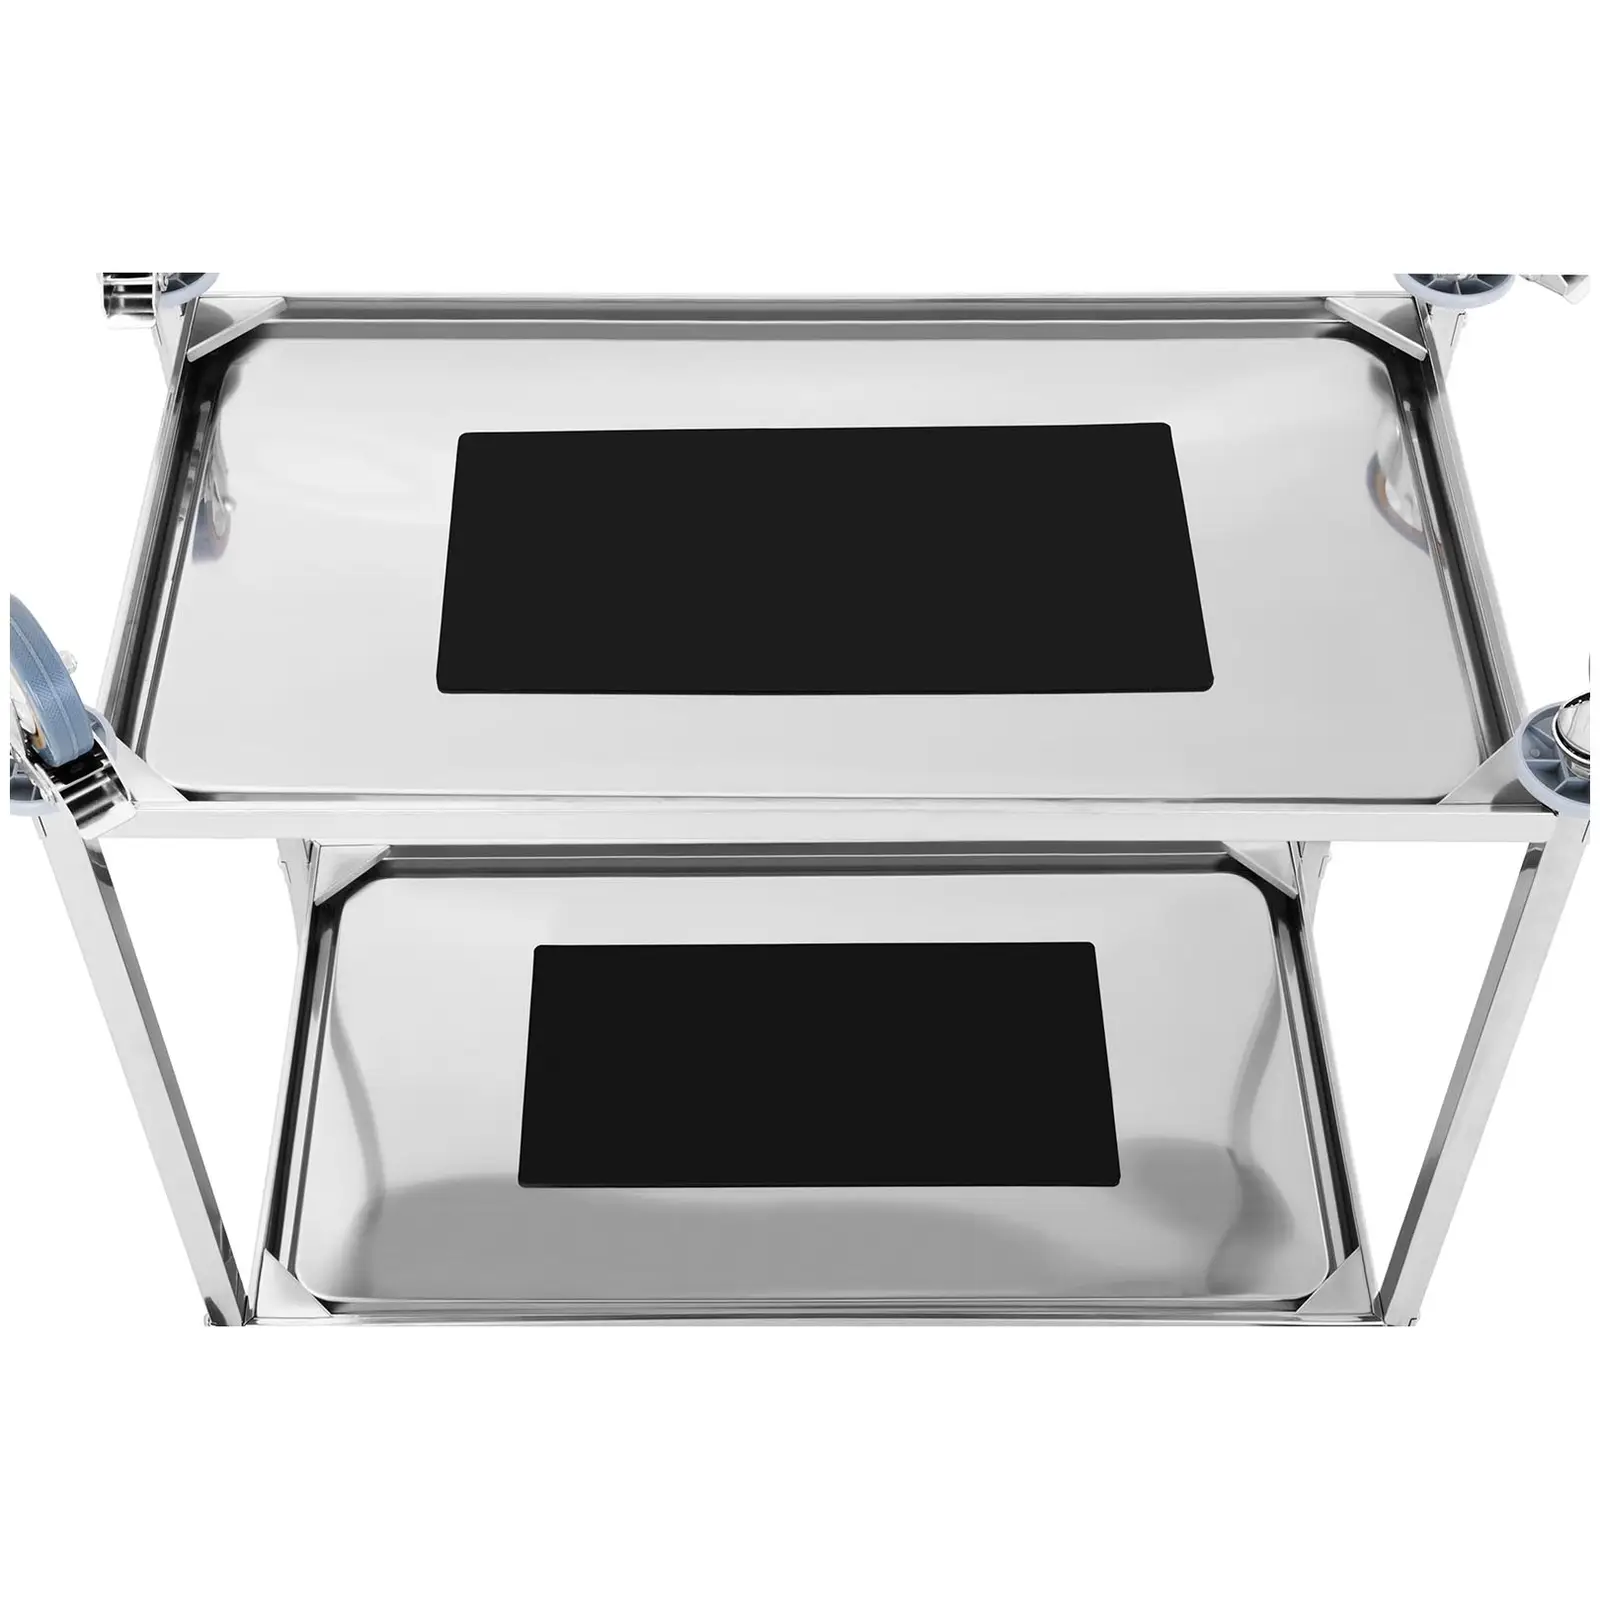 Serving Trolley - 2 Trays - up to 160 kg